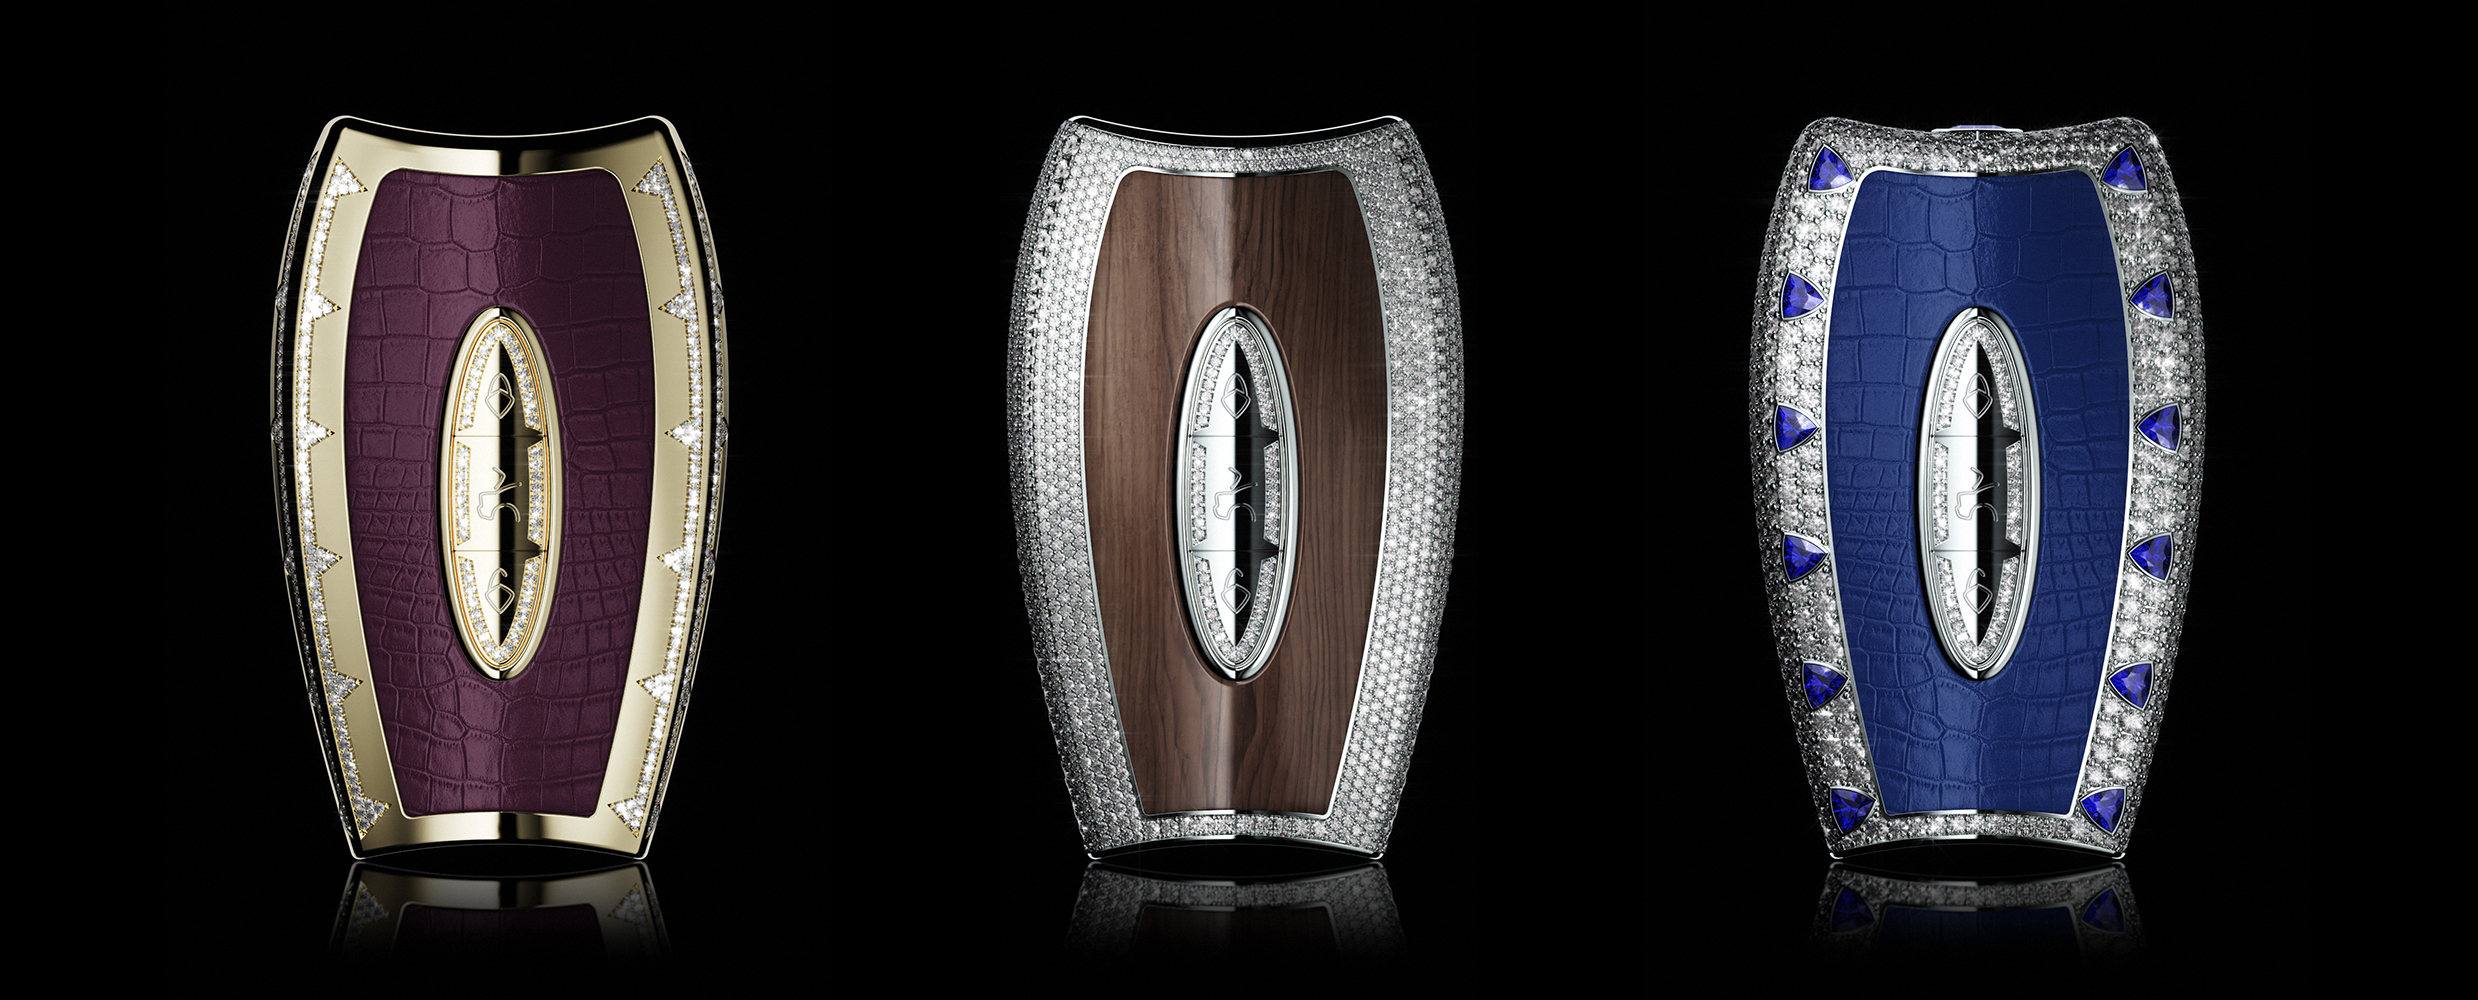 Awain launches the world's most expensive and exclusive Supercar key